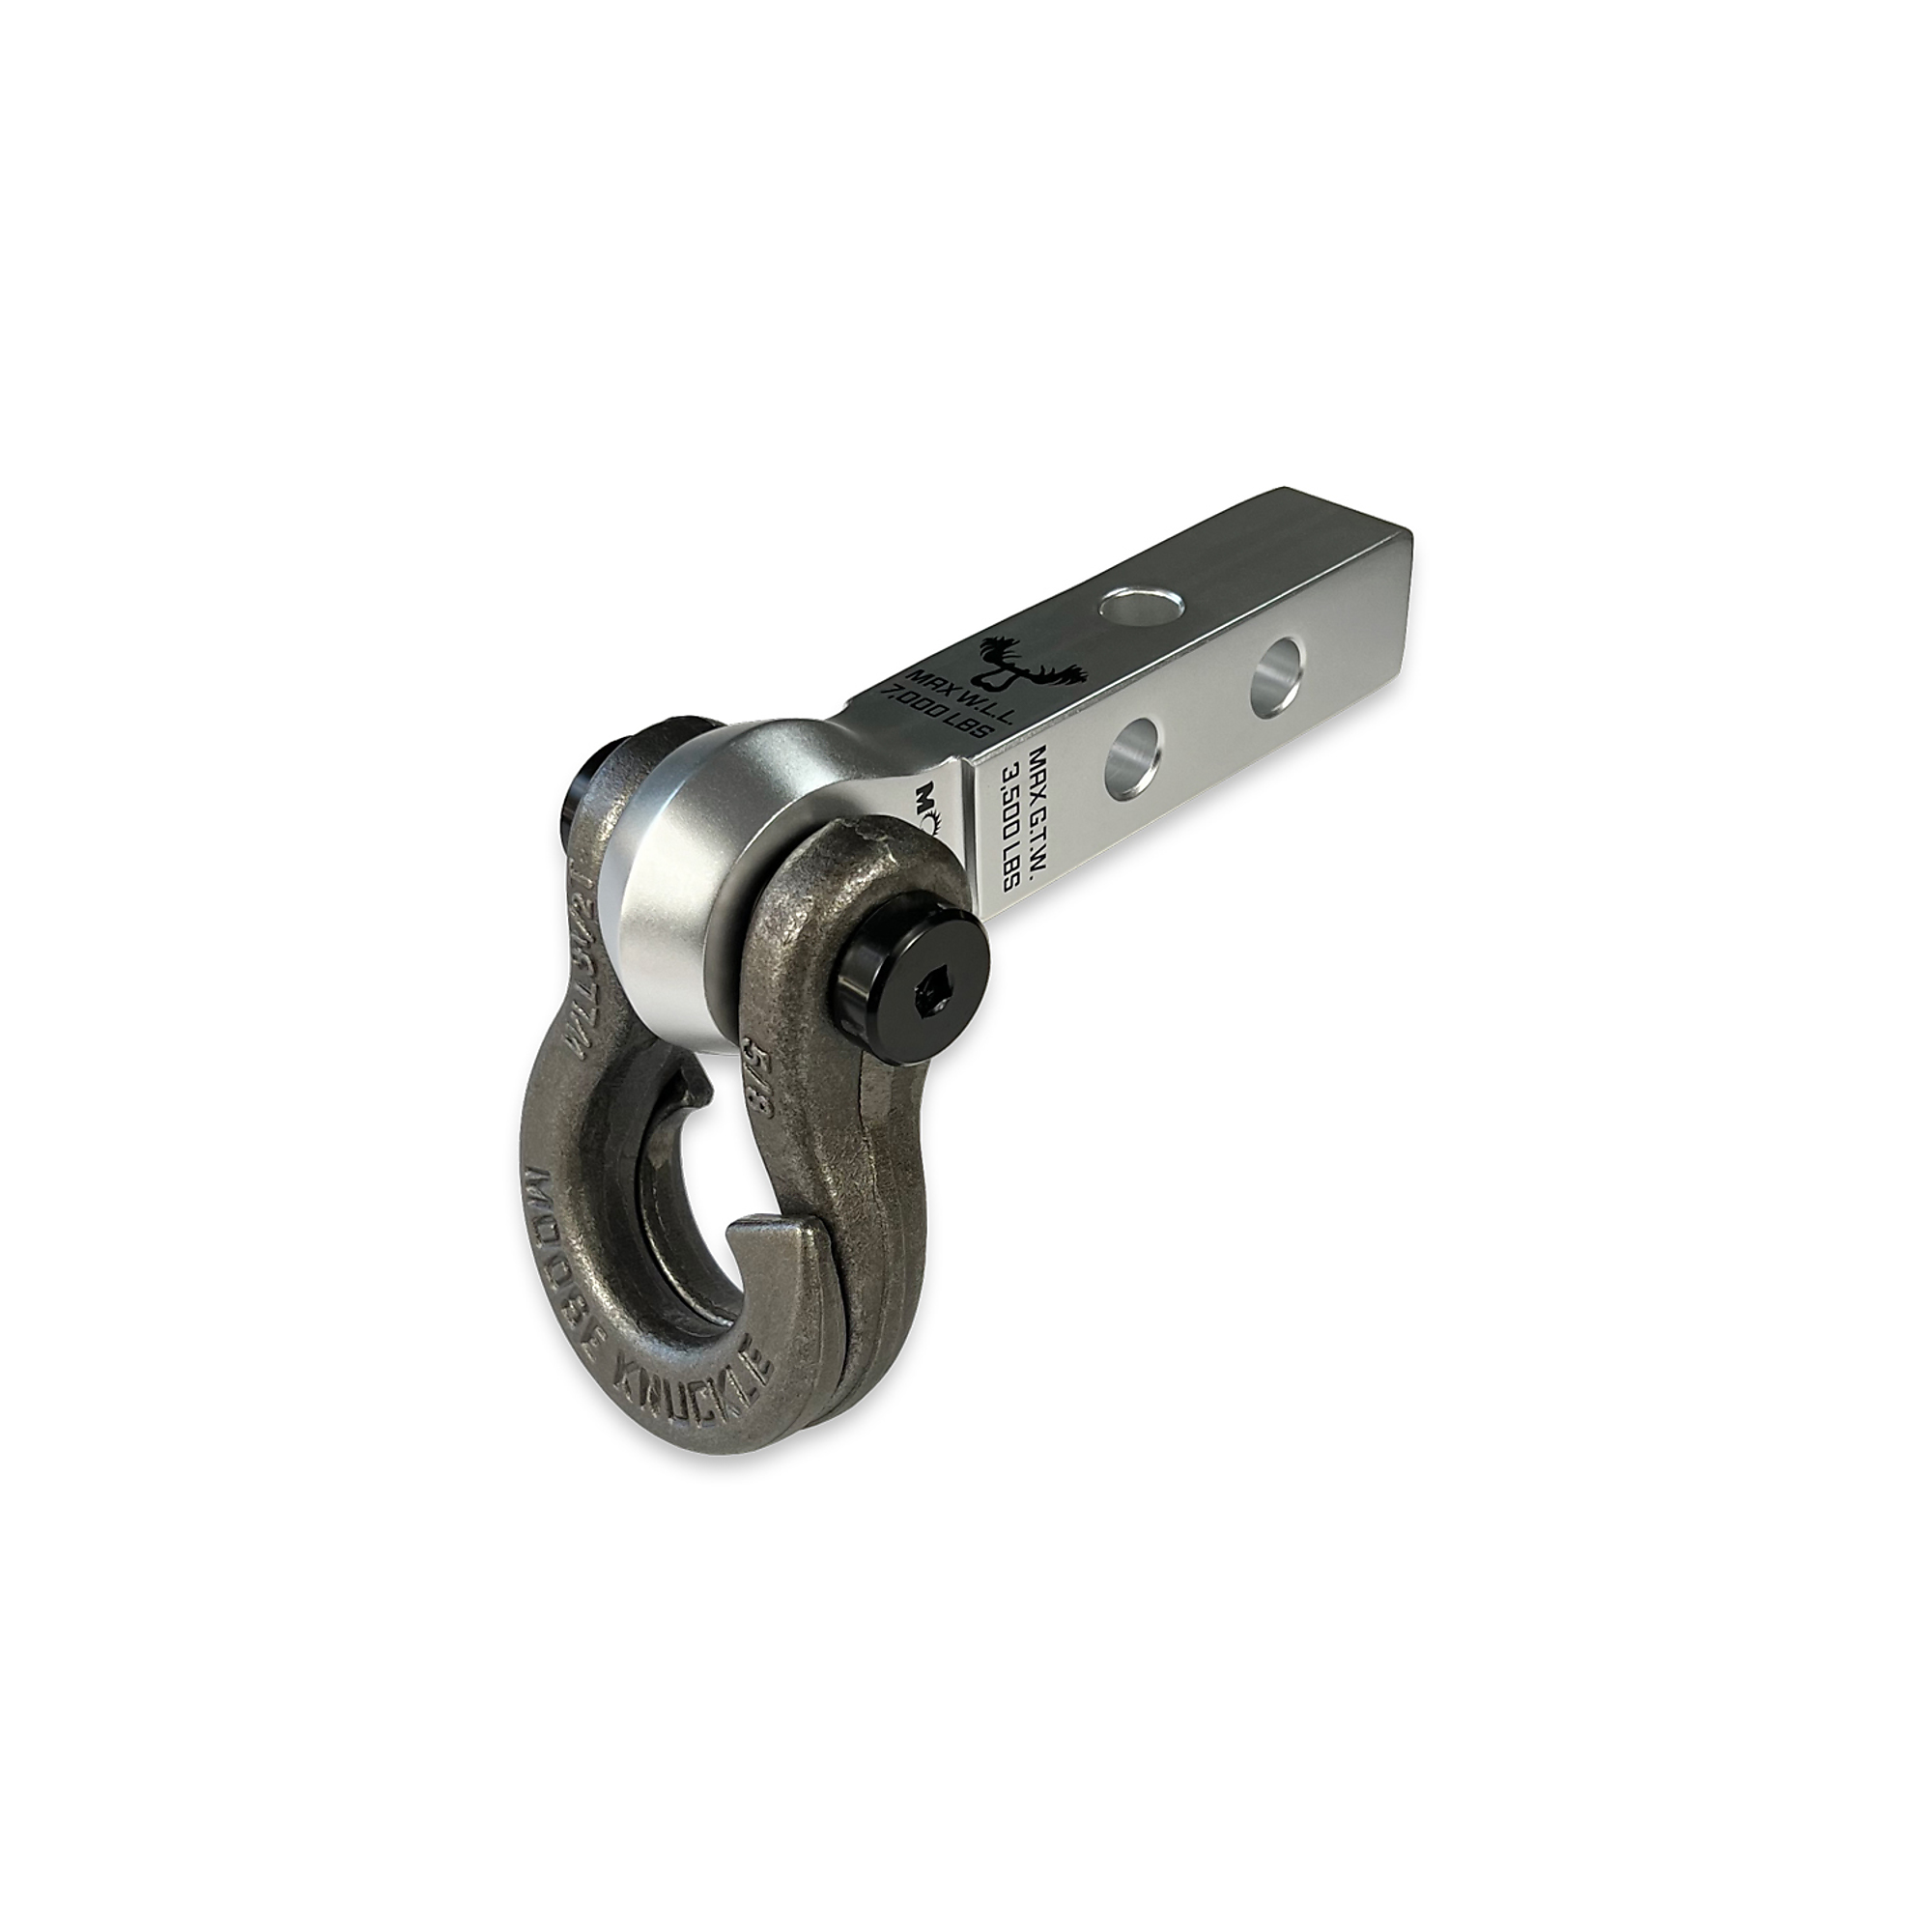 Moose Knuckle Offroad, 5/8 Jowl Split Shackle and Mohawk 1.25 Receiver Combo, Gross Towing Weight 3500 lb, Class Rating Class II, Model FN000043-014